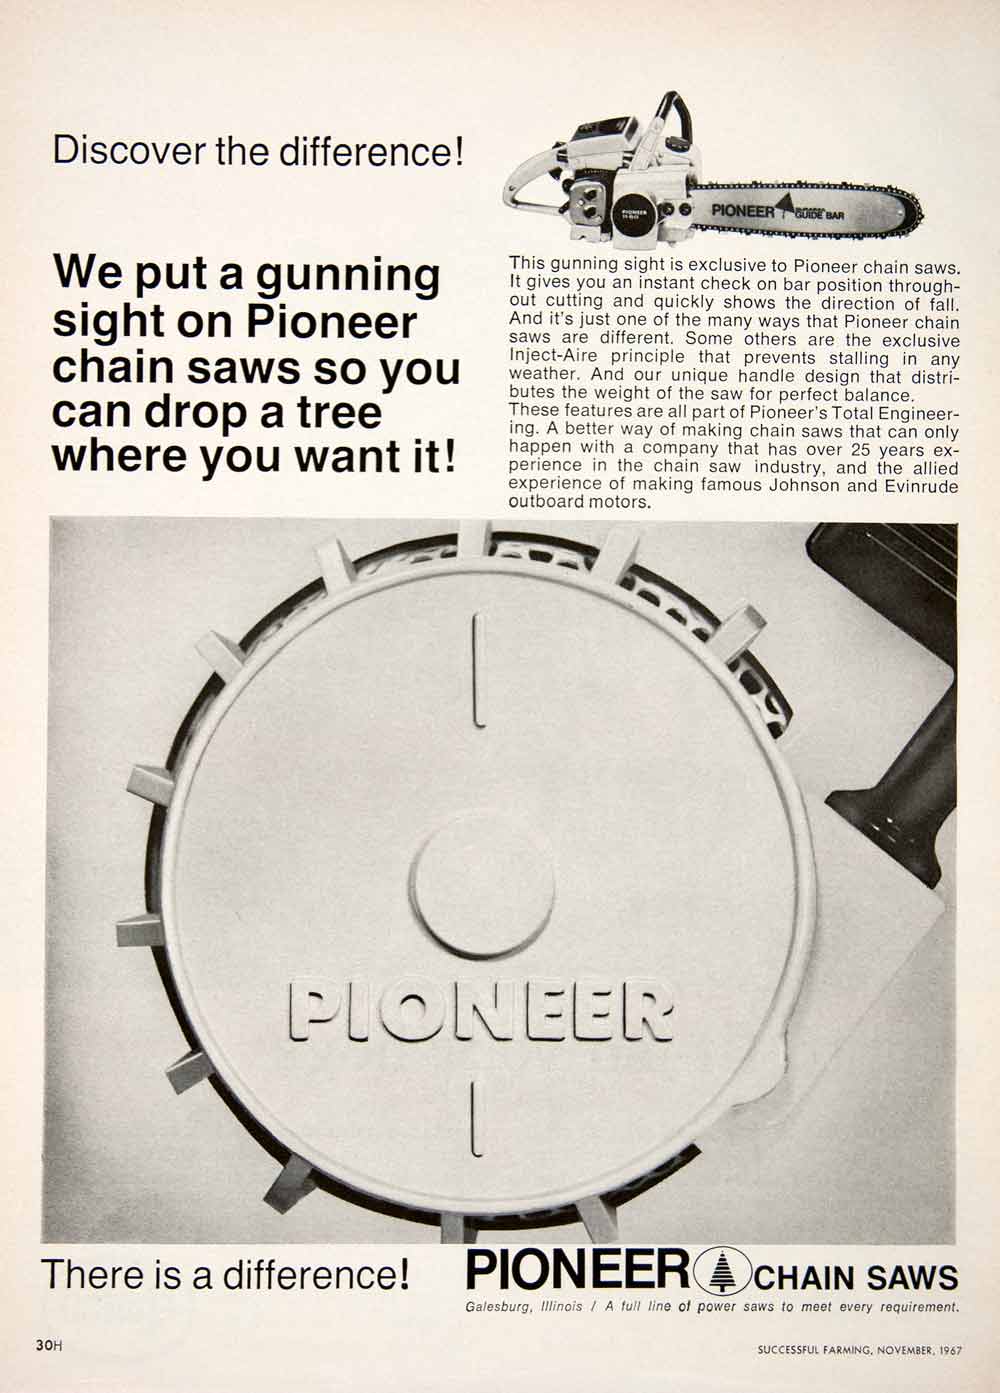 1967 Ad Pioneer Chain Saw Evinrude Galesburg Illinois Farming Tool Implement SF1